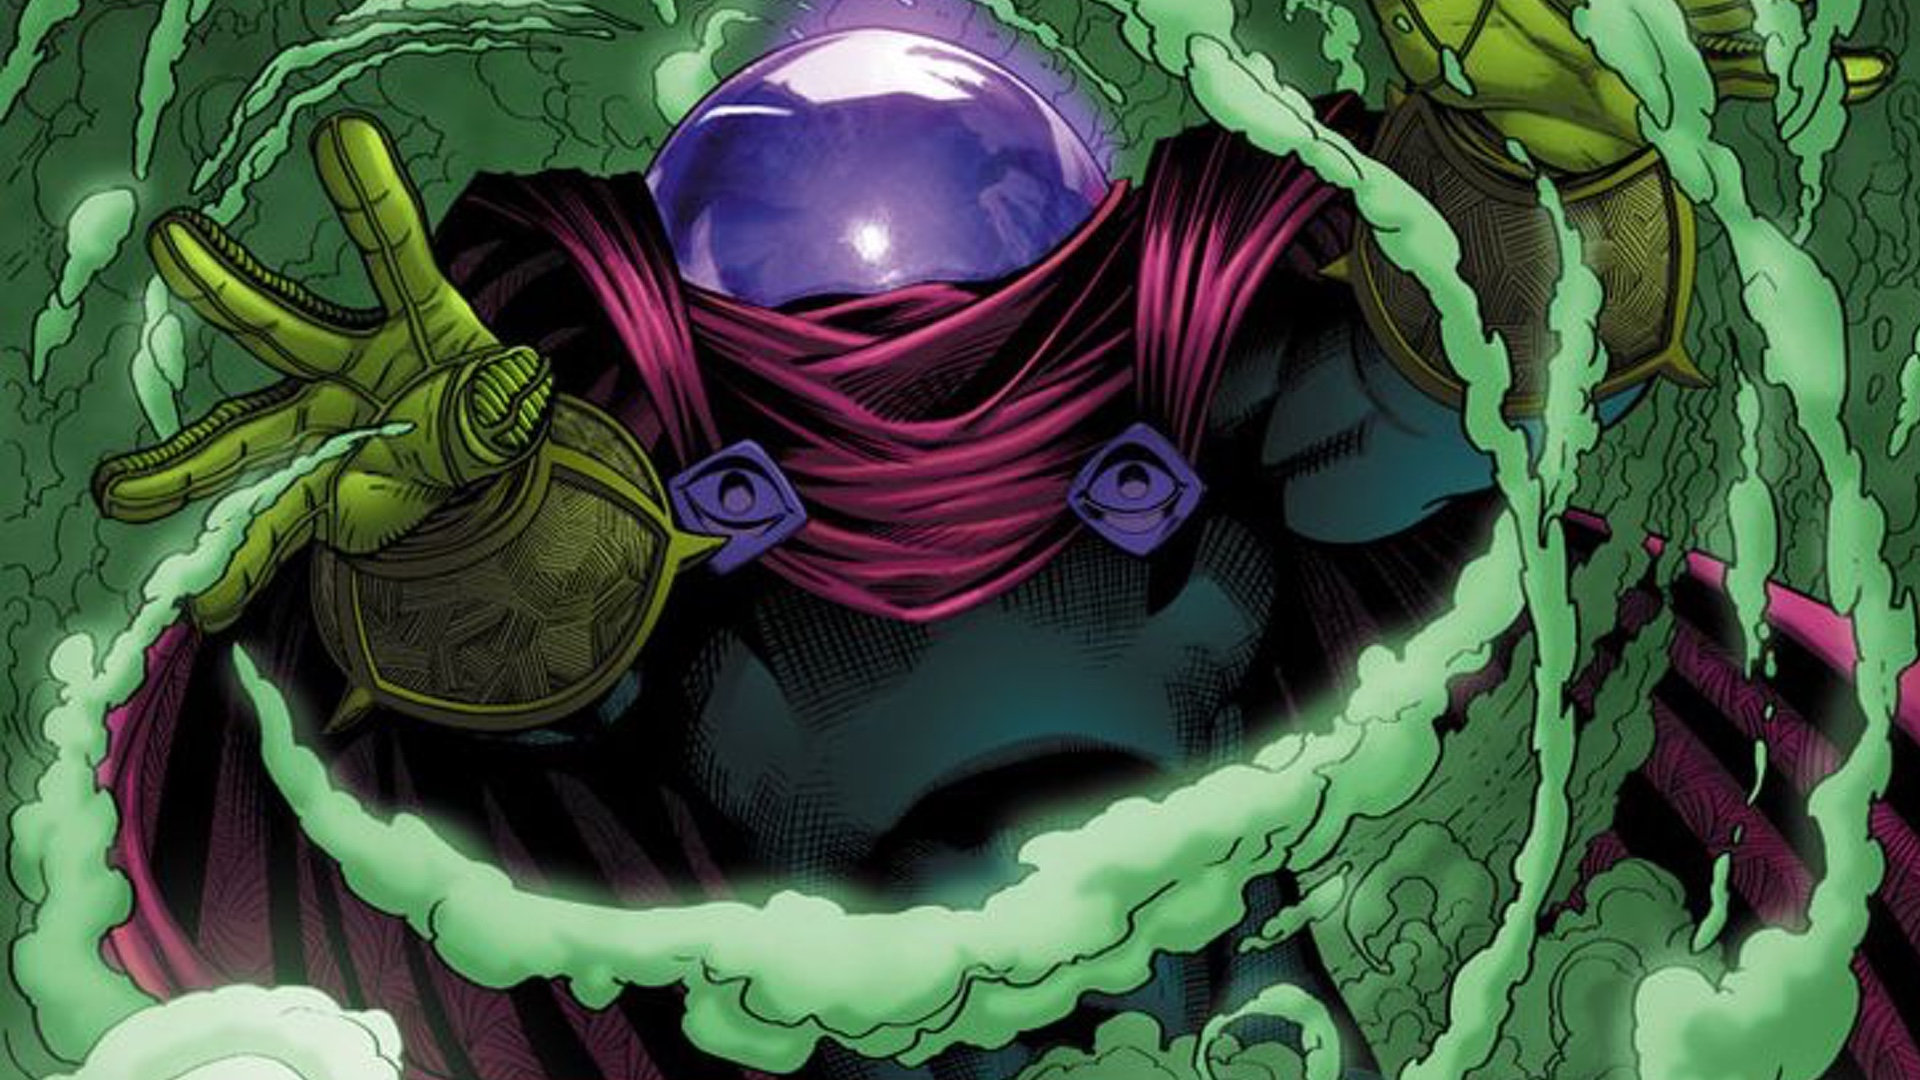 Spider Man Far From Home Set Image Gives First Look At Mysterio